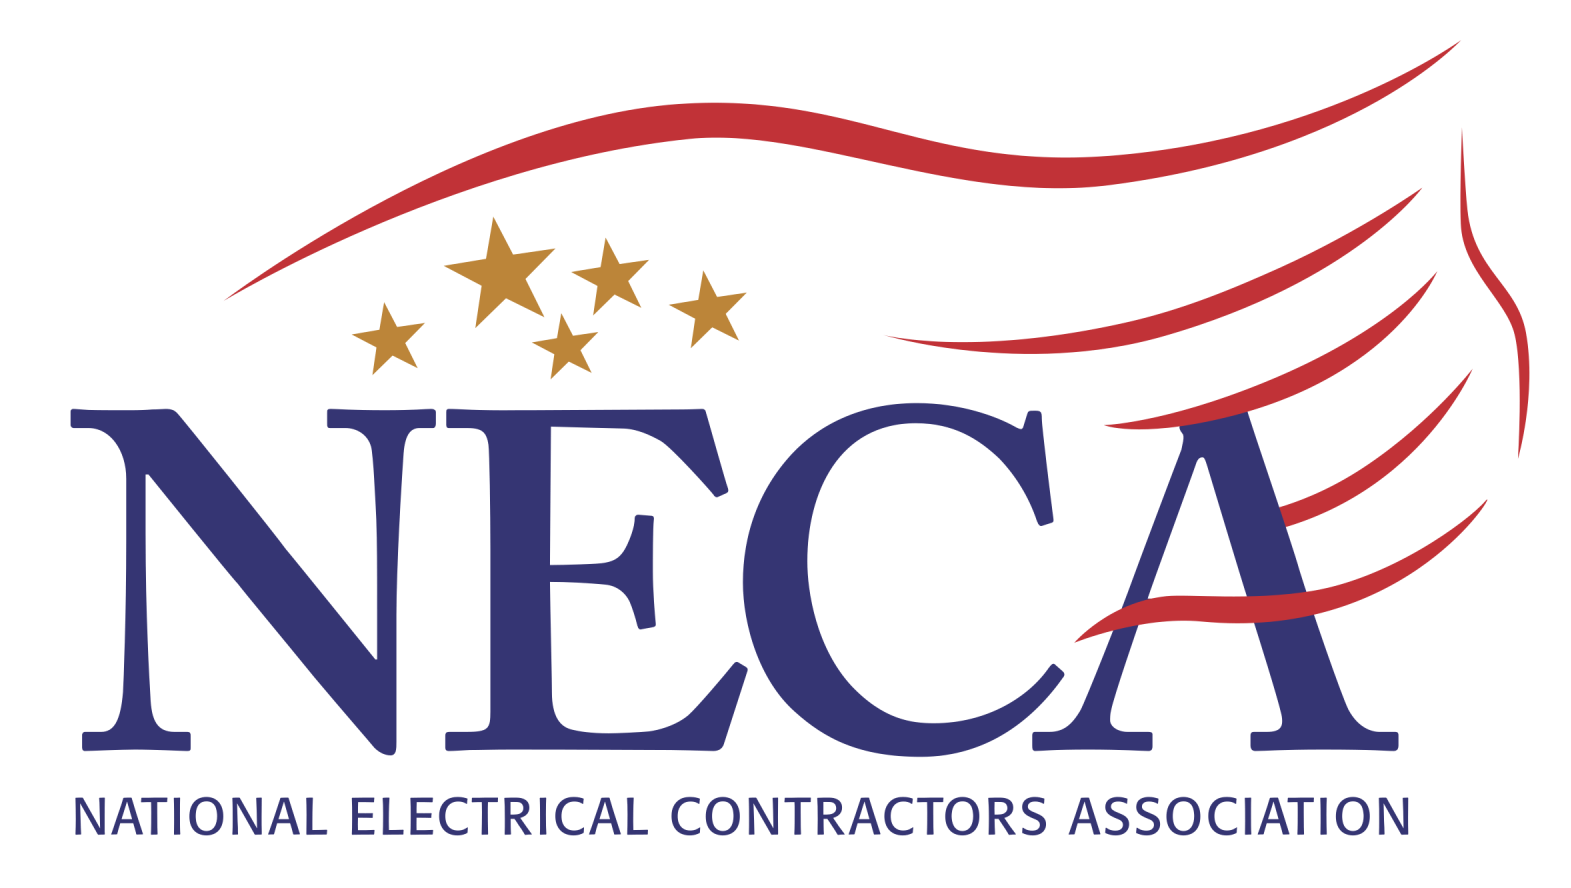 Northern Illinois Chapter - National Electrical Contractors Association (NECA) Northern Illinois Chapter's Image